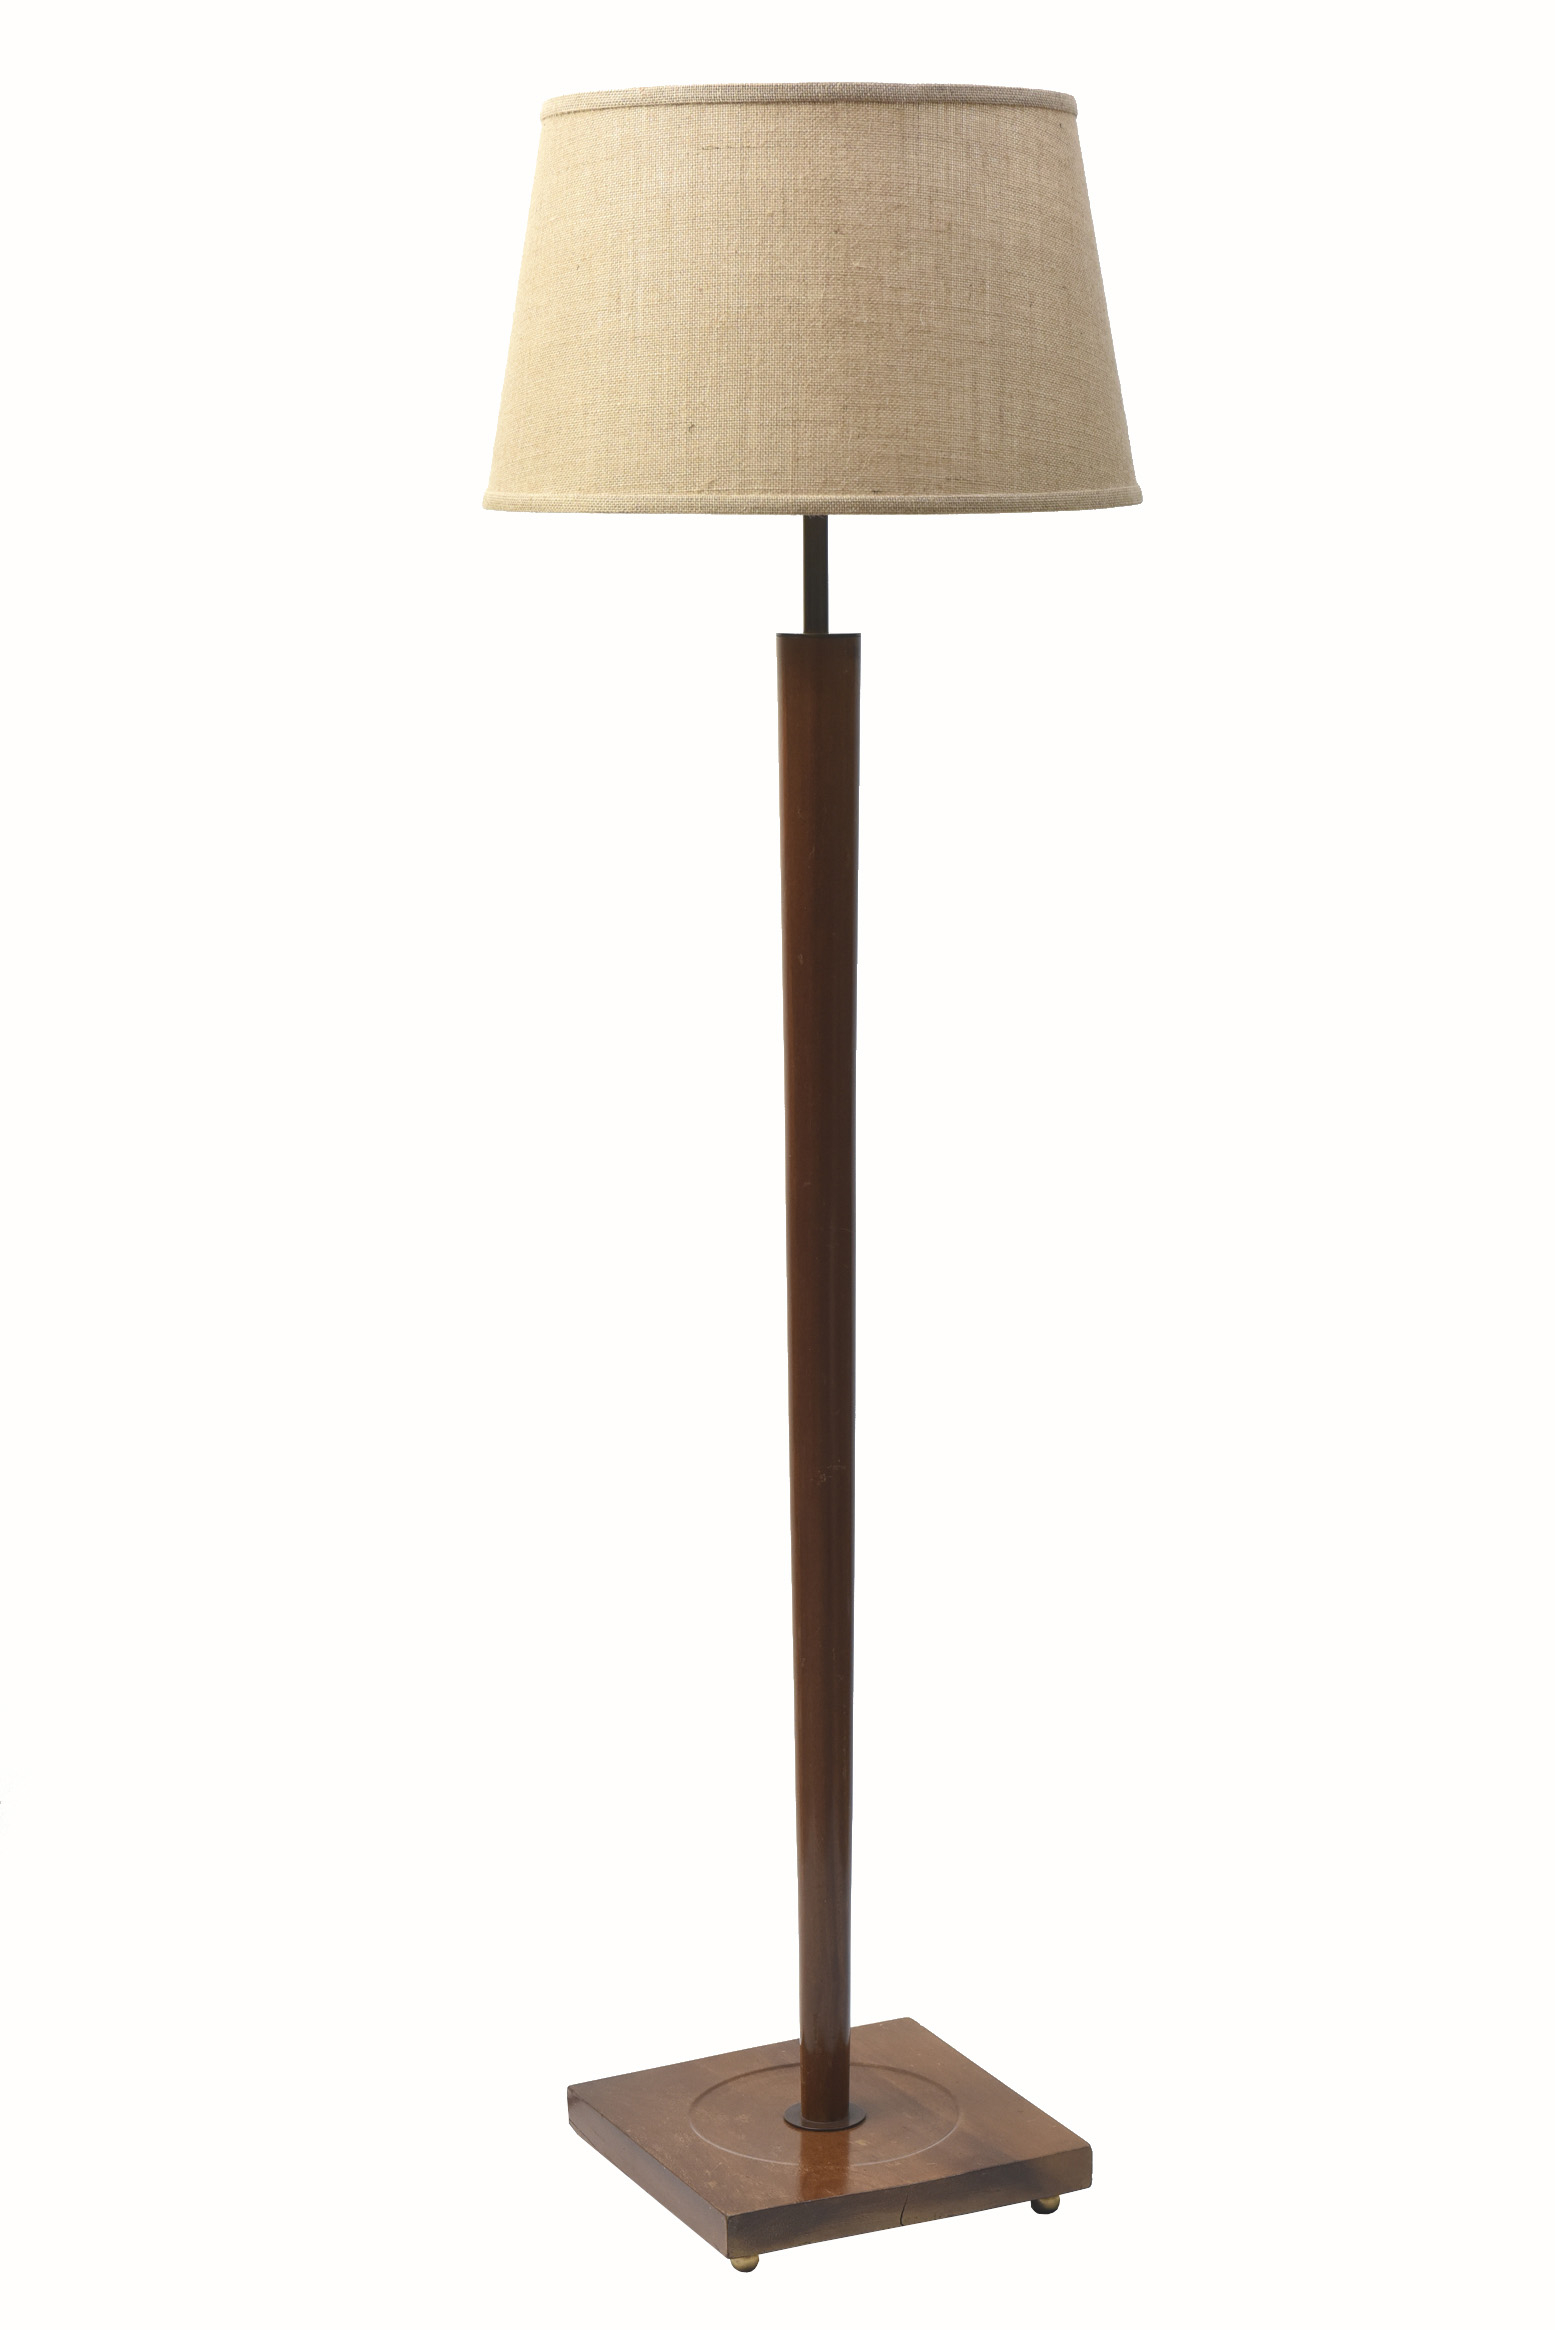 Mid Century Wooden Floor Lamp intended for sizing 1555 X 2330